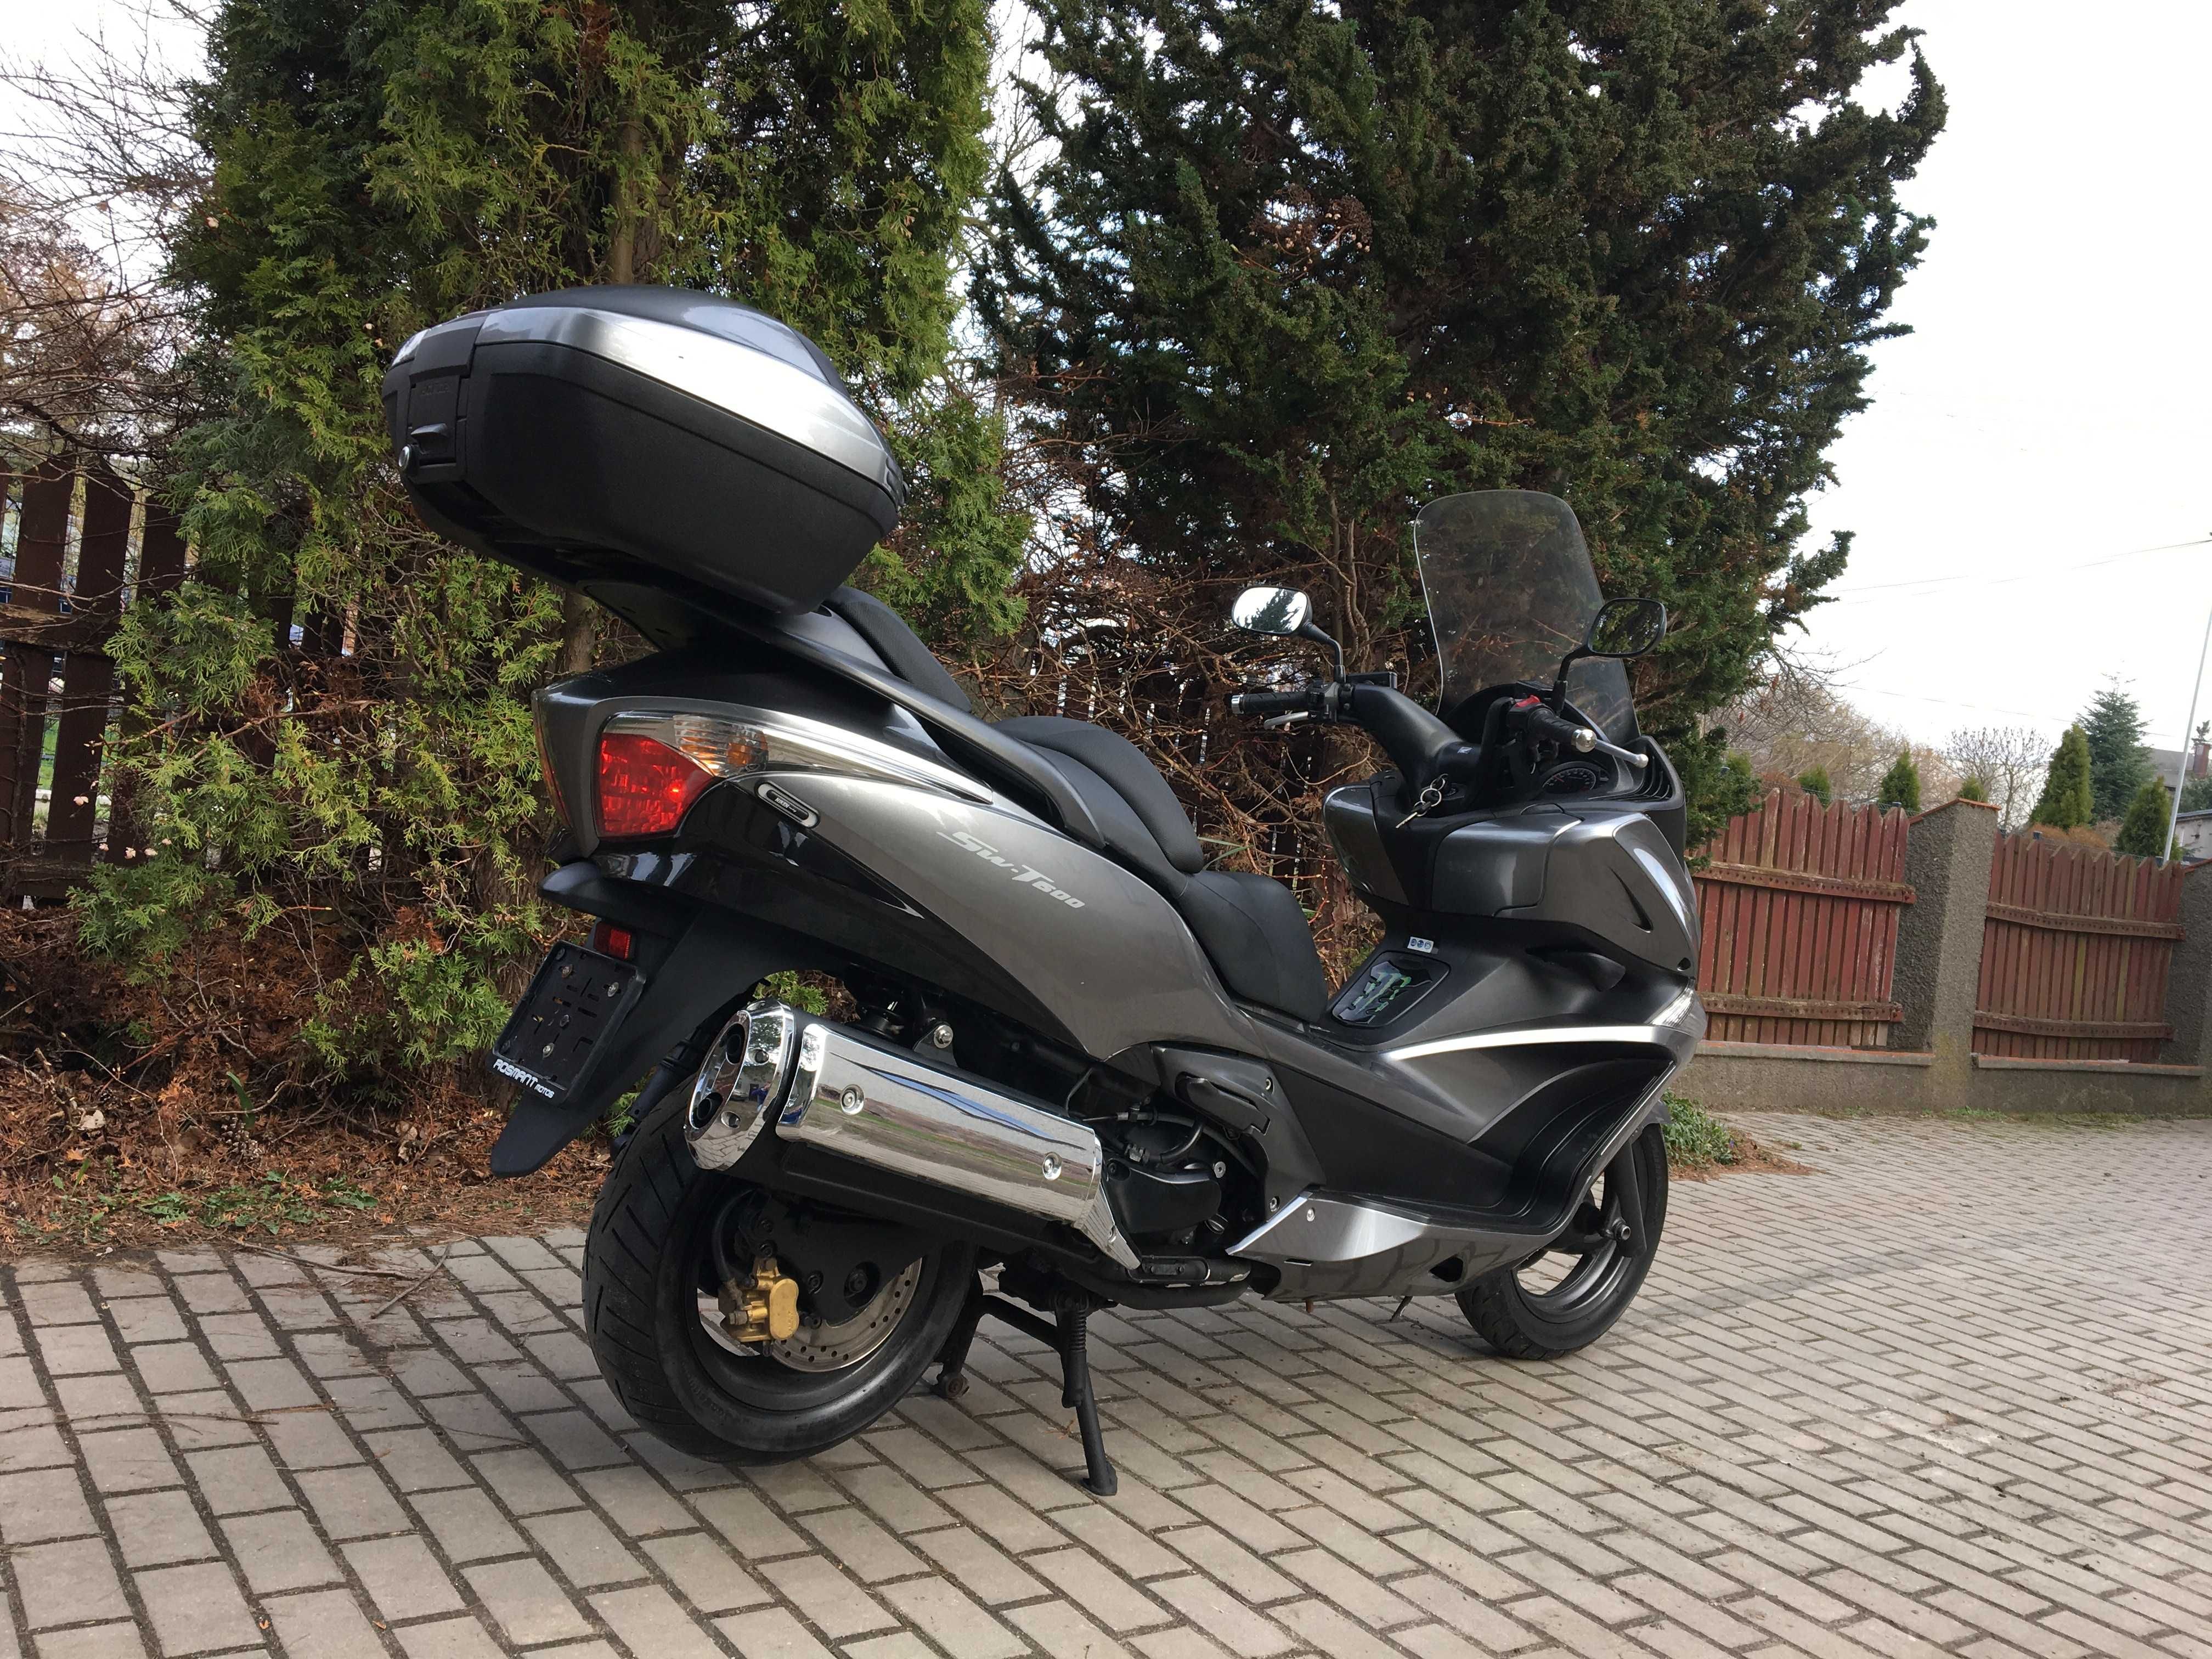 Honda SWT 600 Silver Wing 2012r ABS 2 cylindry FJS RATY RATY